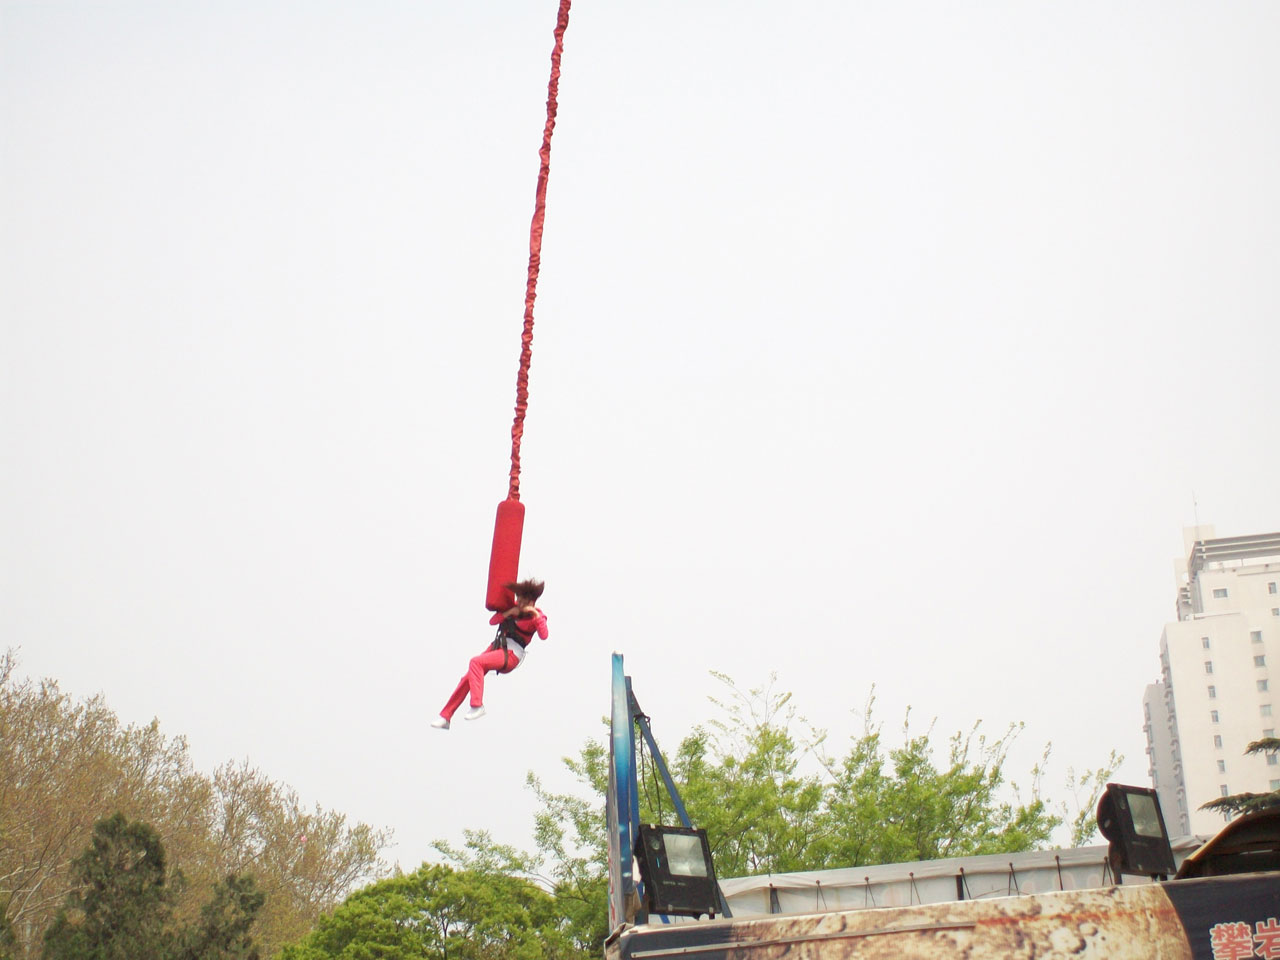 bungee cord jumping free photo